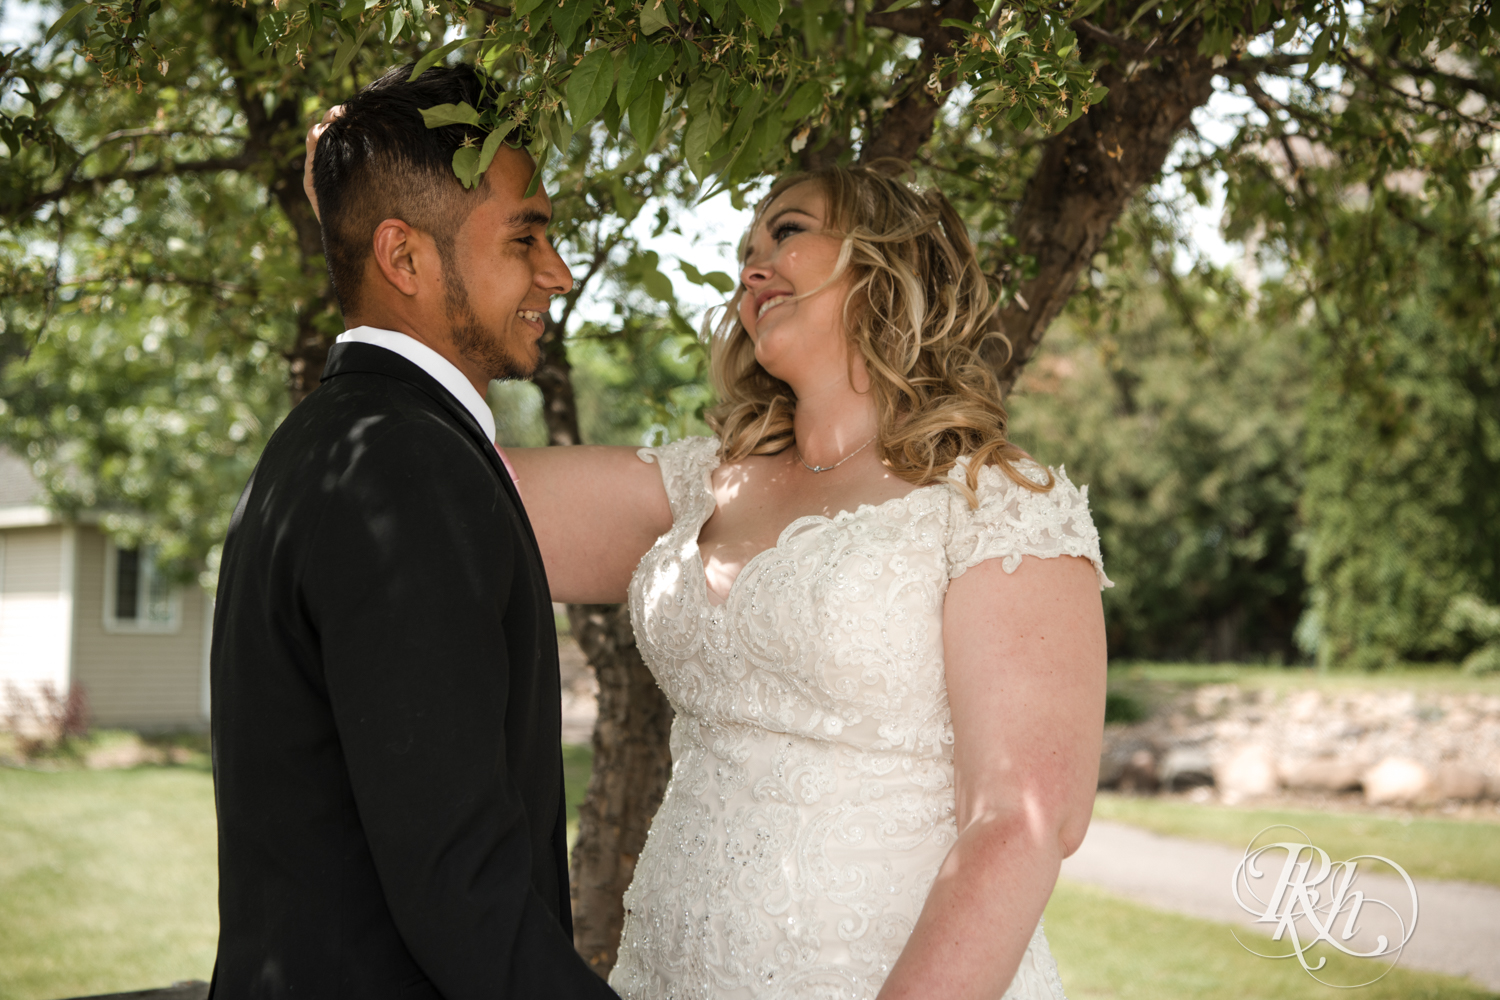 Bride and groom share first look at Izatys Resort in Onamia, Minnesota on a summer day.